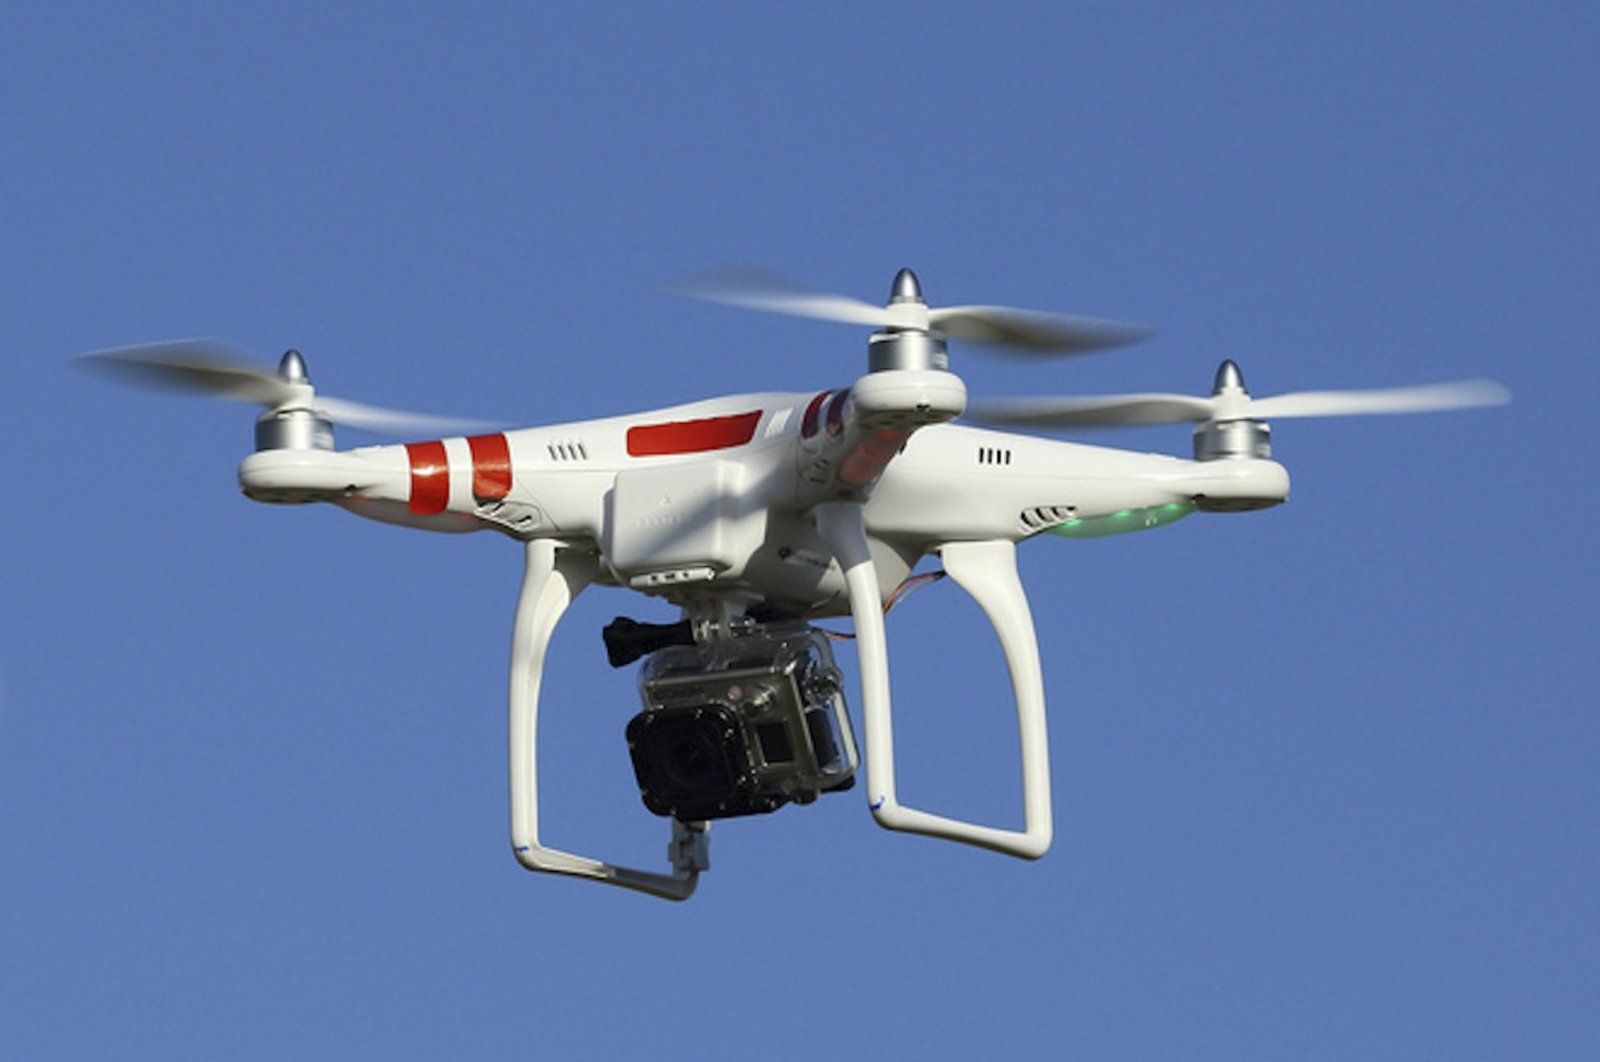 The opening of drone registration system in July 2019, which provides flight permits for drones online, significantly increased drone traffic in Turkey.